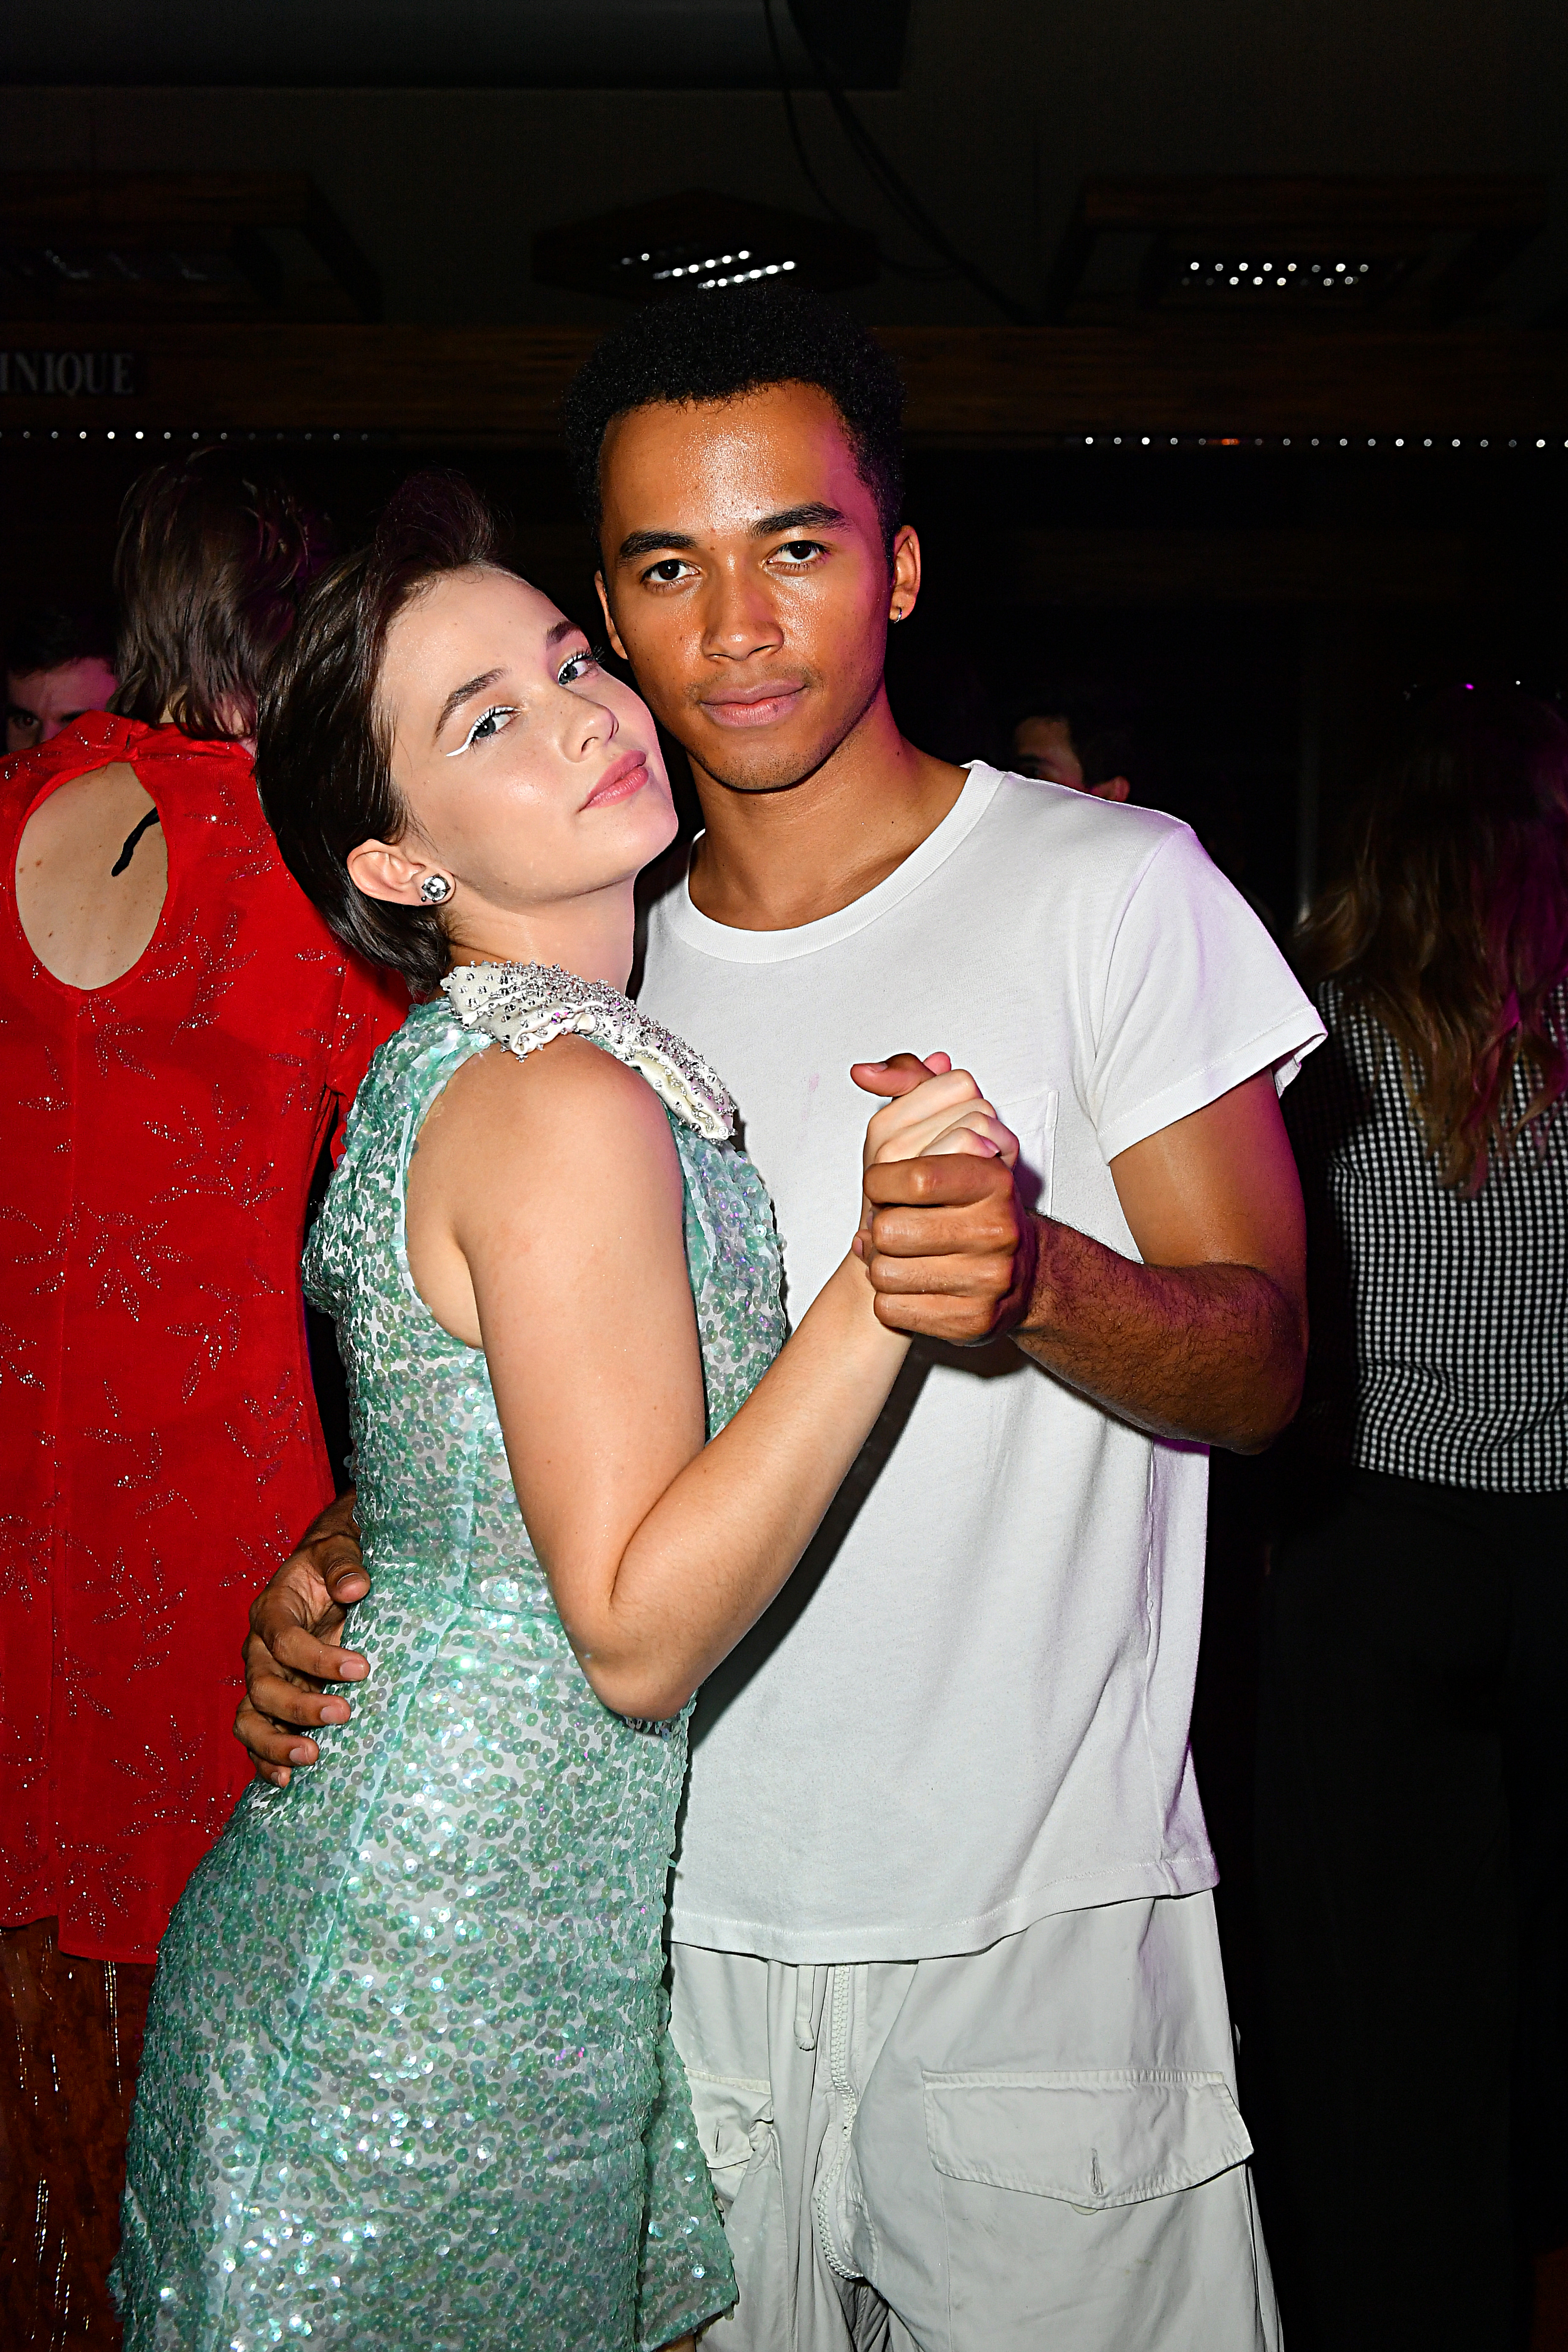 Cailee Spaeny and Raymond Alexander Cham Jr. at a Miu Miu Club event on June 29, 2019, in Paris, France. | Source: Getty Images